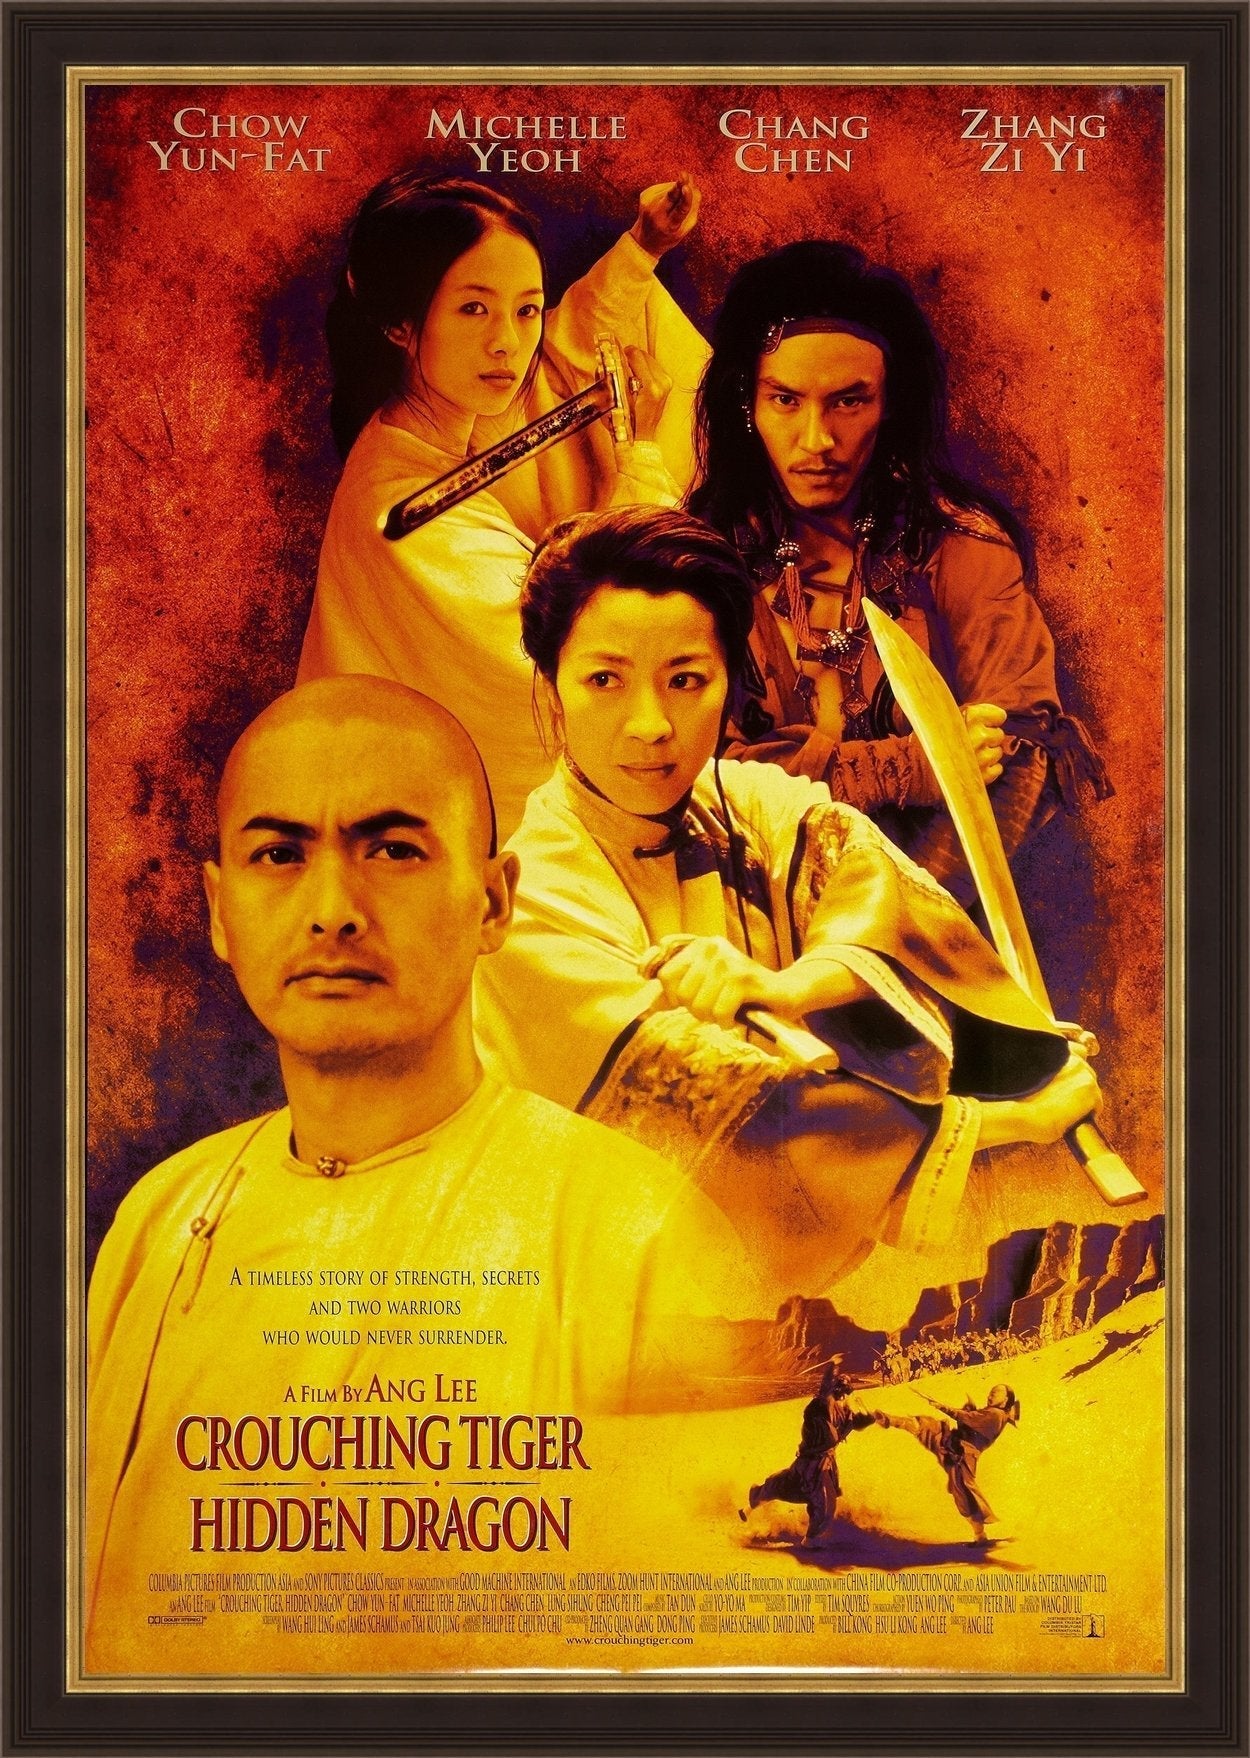 An original movie poster for the Ang Lee film Crouching Tiger Hidden Dragon